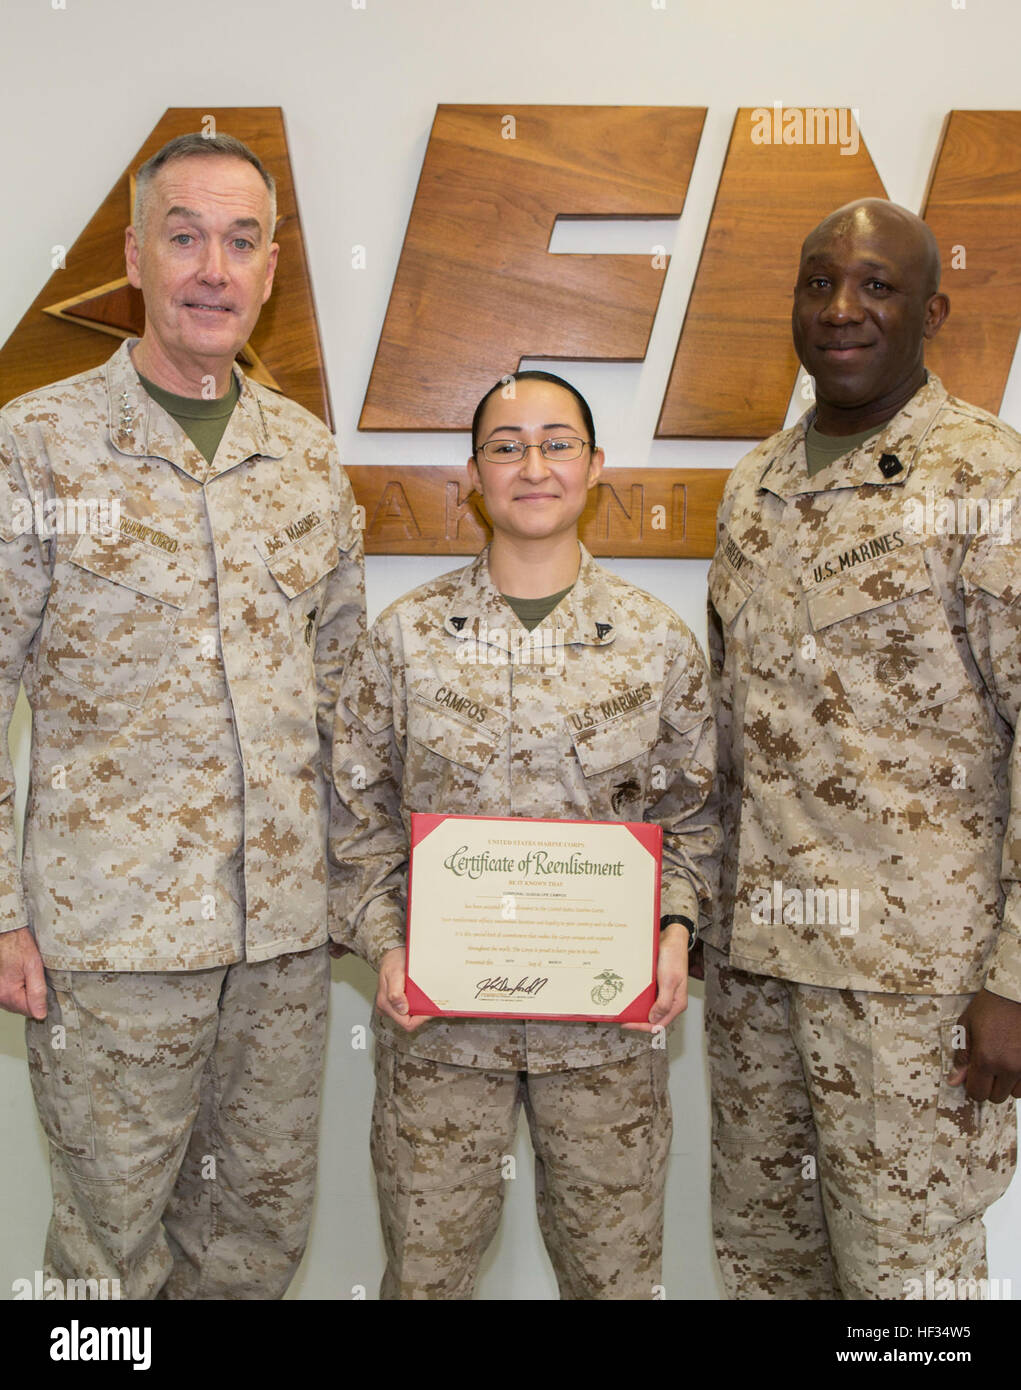 Gen. Joseph Dunford, Commandant of the Marine Corps, and Sgt. Maj. Ronald Green, Sergeant Major of the Marine Corps, pose with Cpl. Guadalupe Campos, a broadcaster with American Forces Network, after her reenlistment during a visit to Marine Corps Air Station Iwakuni, Japan, March 24, 2015. Campos was named Marine Corps Installations Command Marine of the Year for 2014. During their visit, Dunford and Green also conducted an all-hands brief and toured some of the units aboard station including Marine All-Weather Fighter Attack Squadron 242 and Marine Aviation Logistics Squadron 12. Dunford als Stock Photo